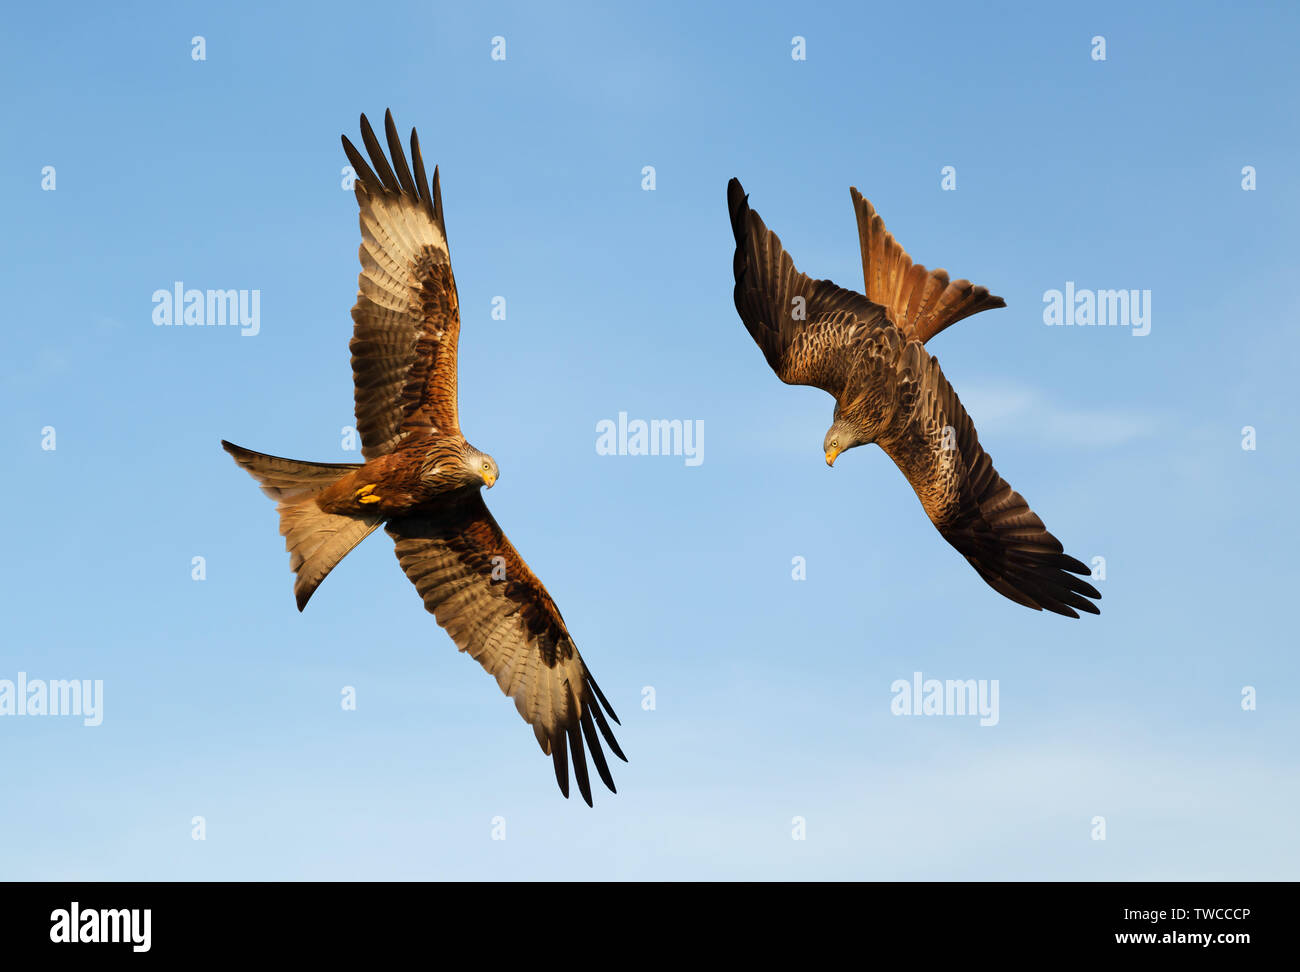 Close up of Red kites in flight against blue sky, Chilterns, Oxfordshire, UK. Stock Photo